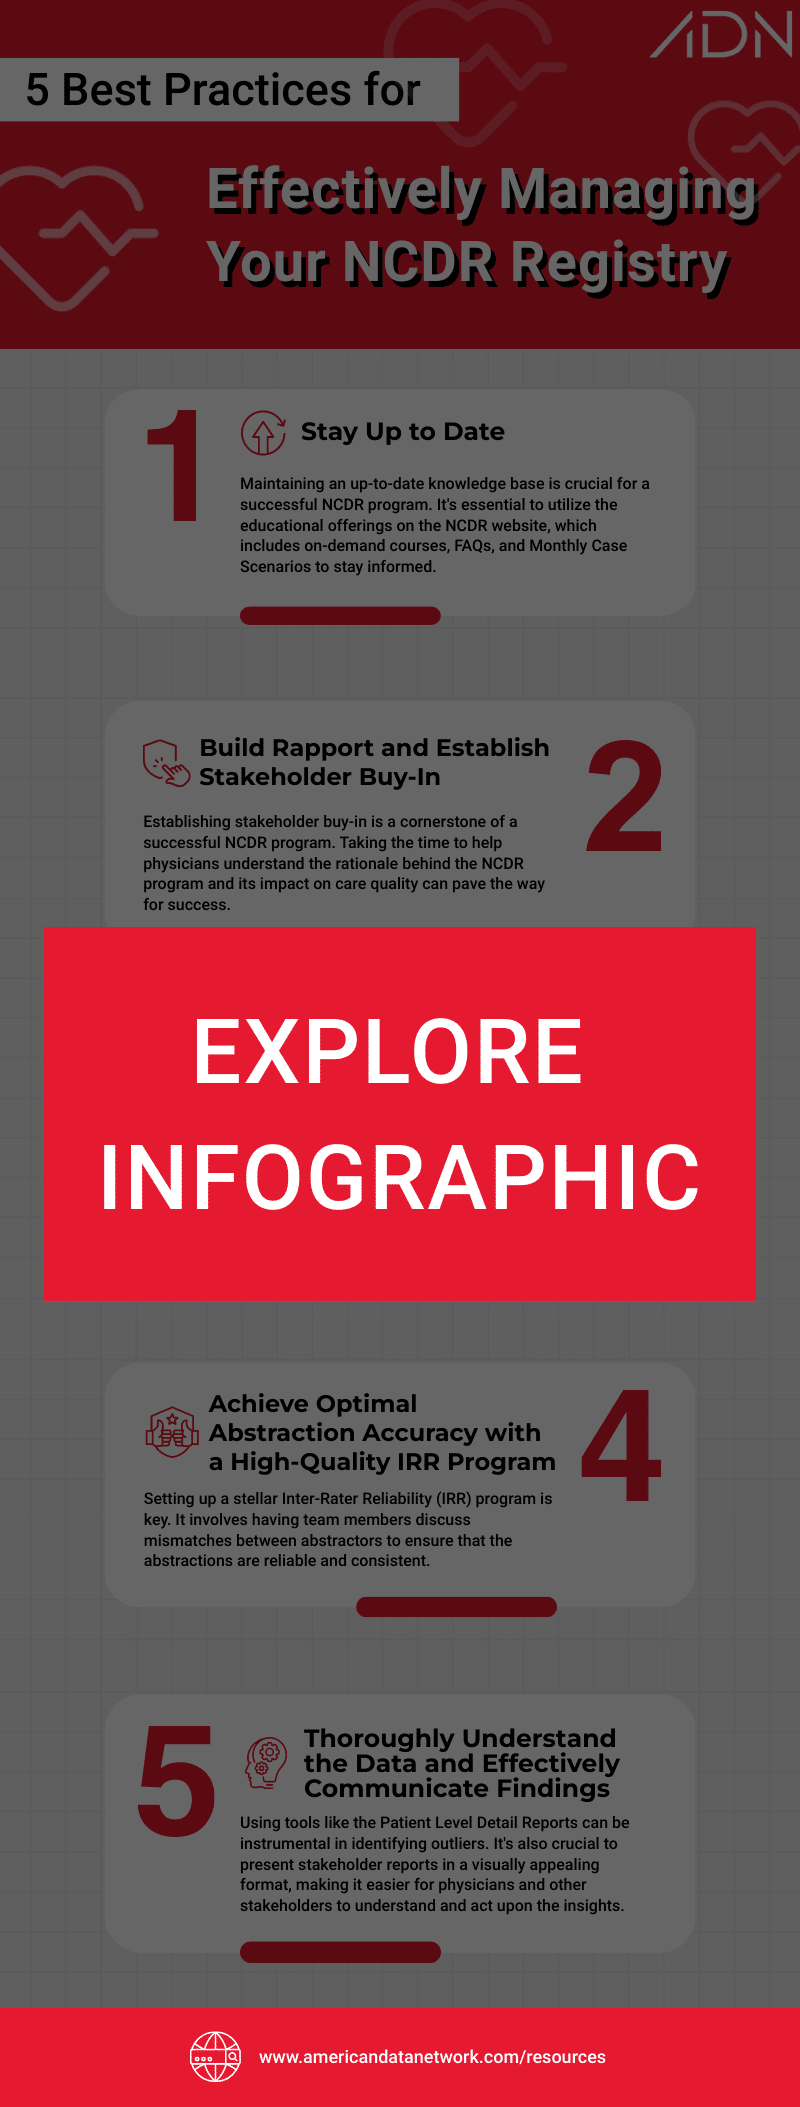 Explore infographic CTA for 5 Best Practices for Effectively Managing Your NCDR Registry